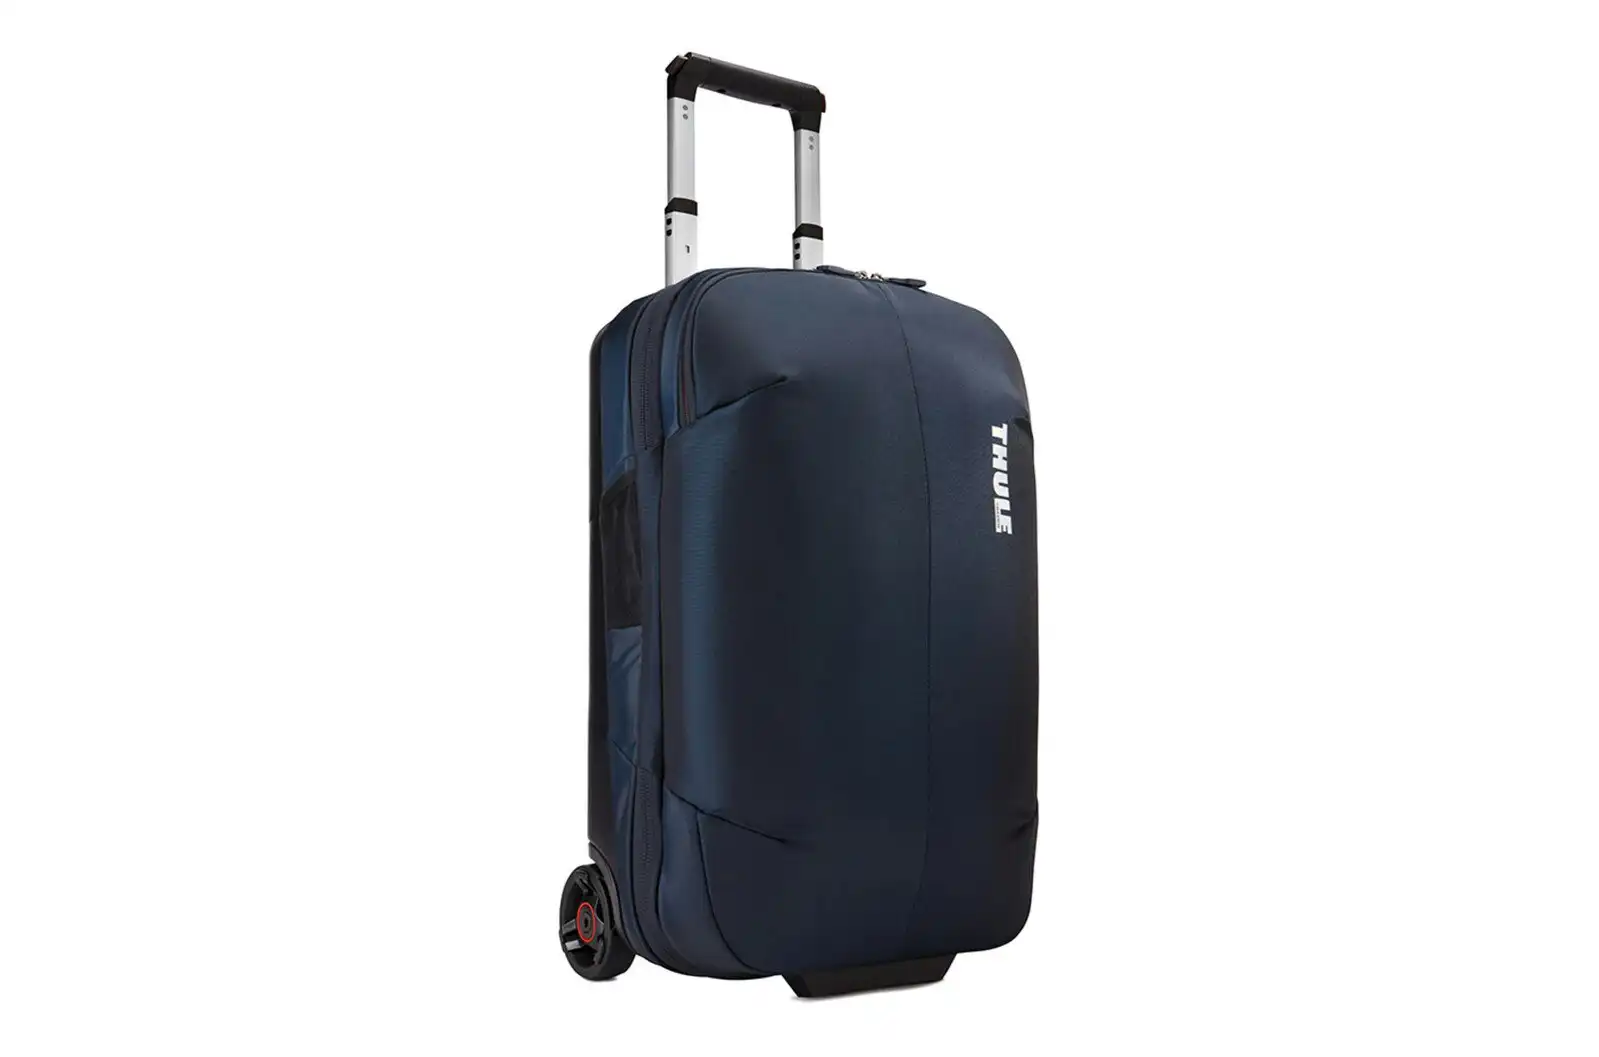 Thule Subterra 36L/55cm Rolling Carry On Travel Luggage Suitcase Bag Mineral BL